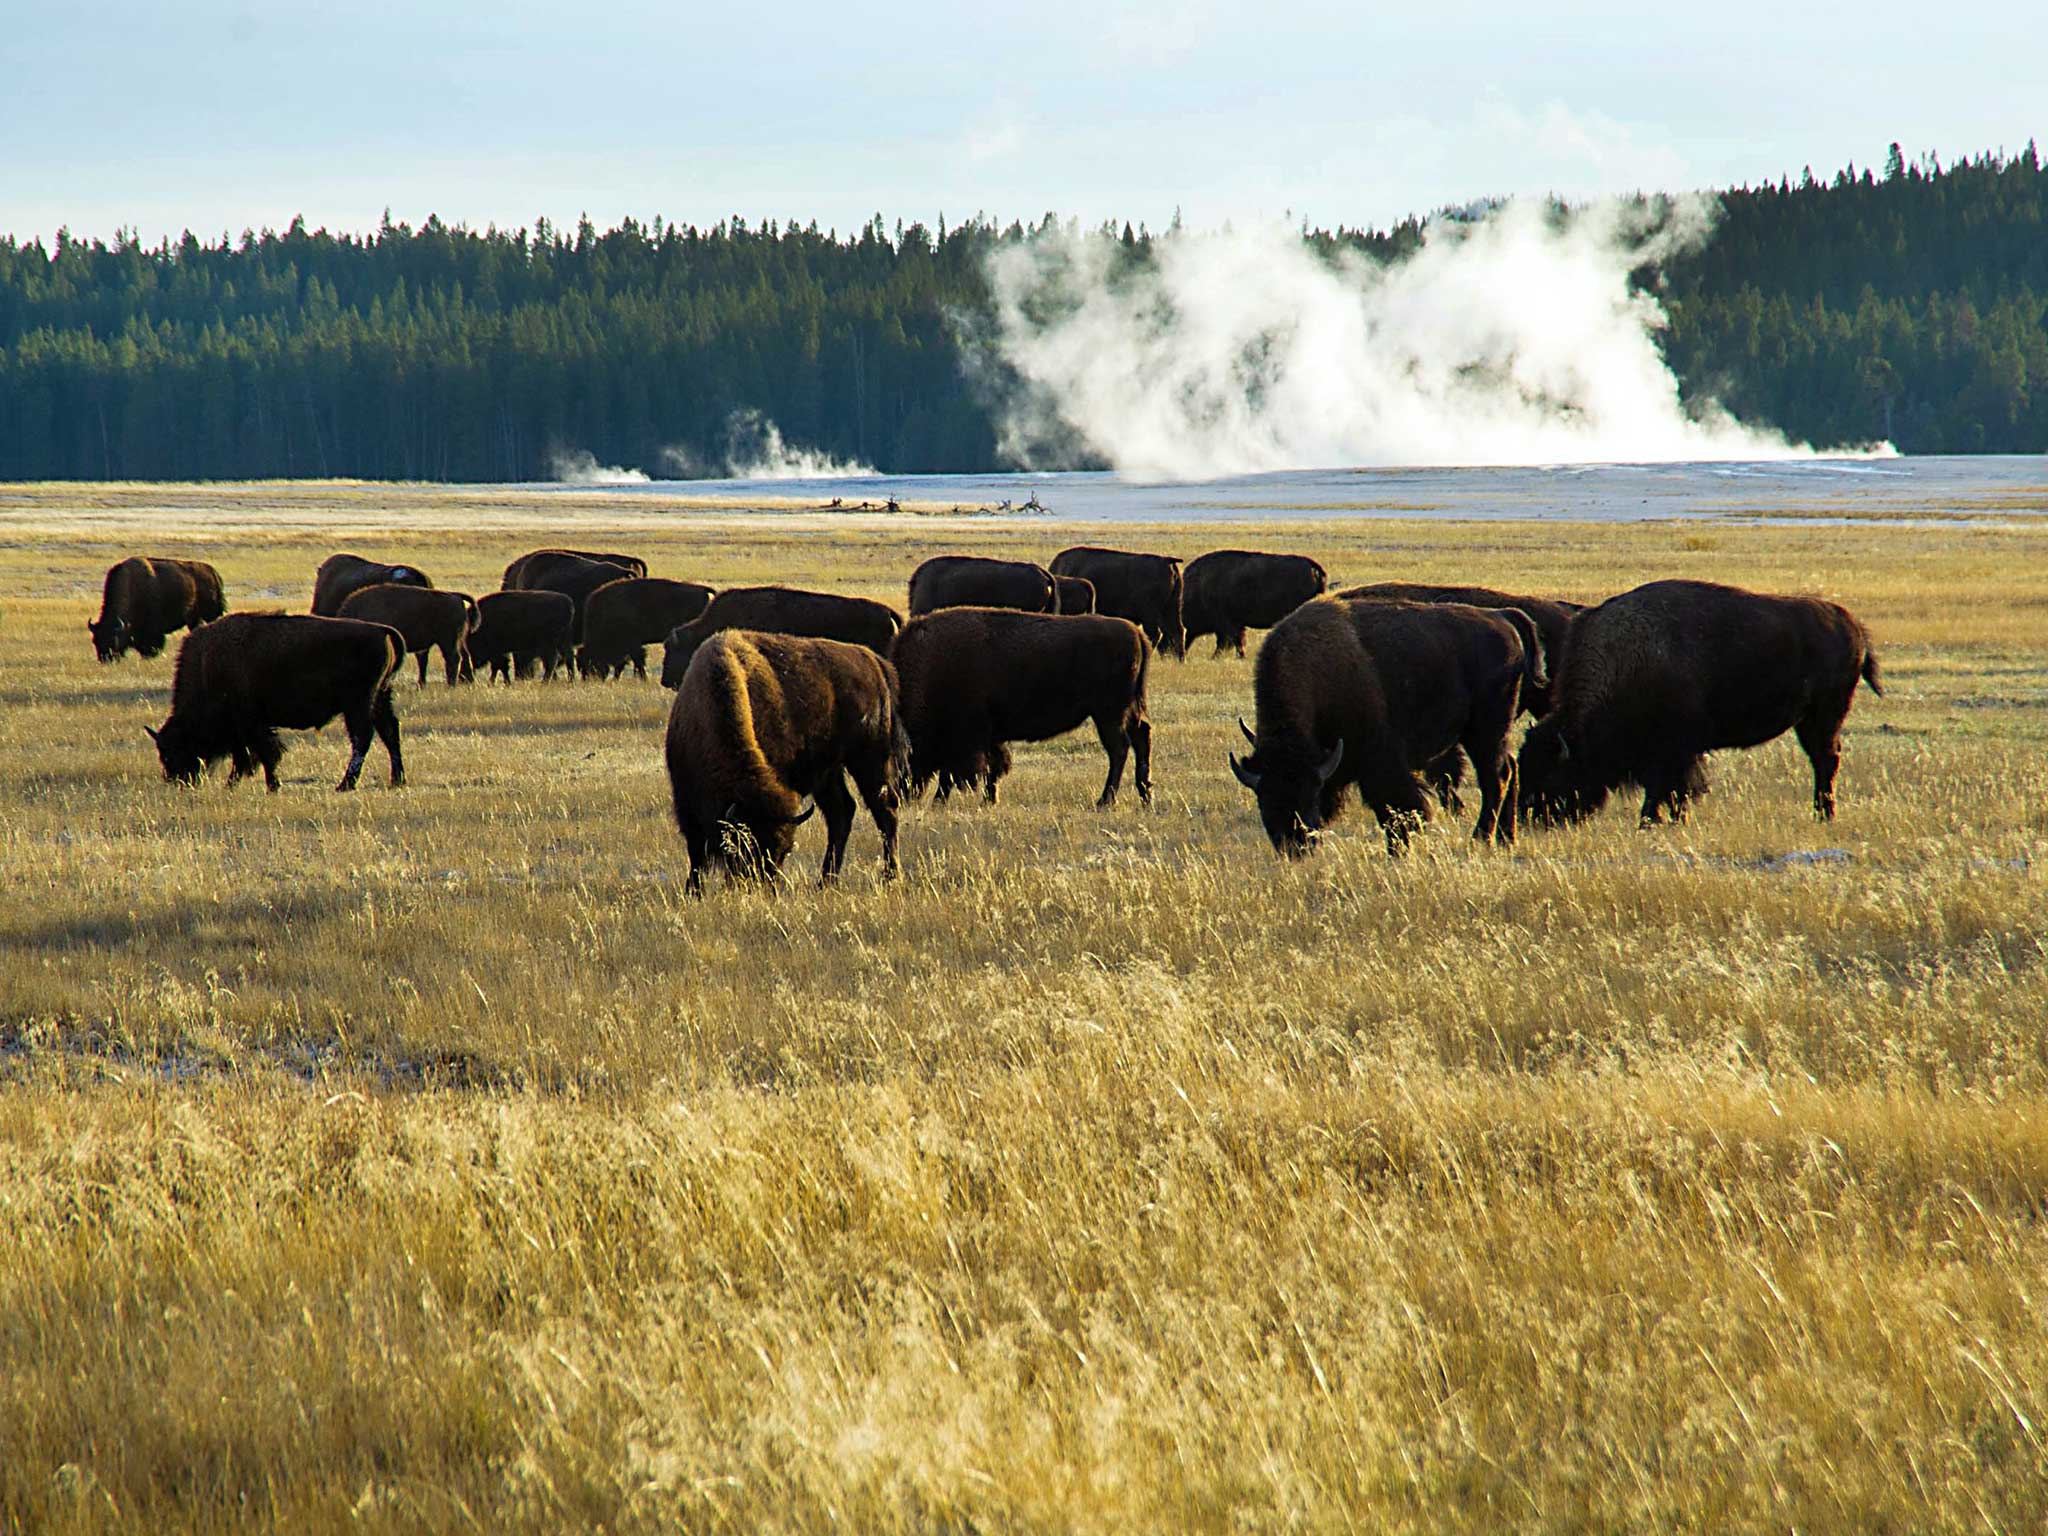 A small portion of the Yellowstone buffalo herd graze in Yellowstone National Park